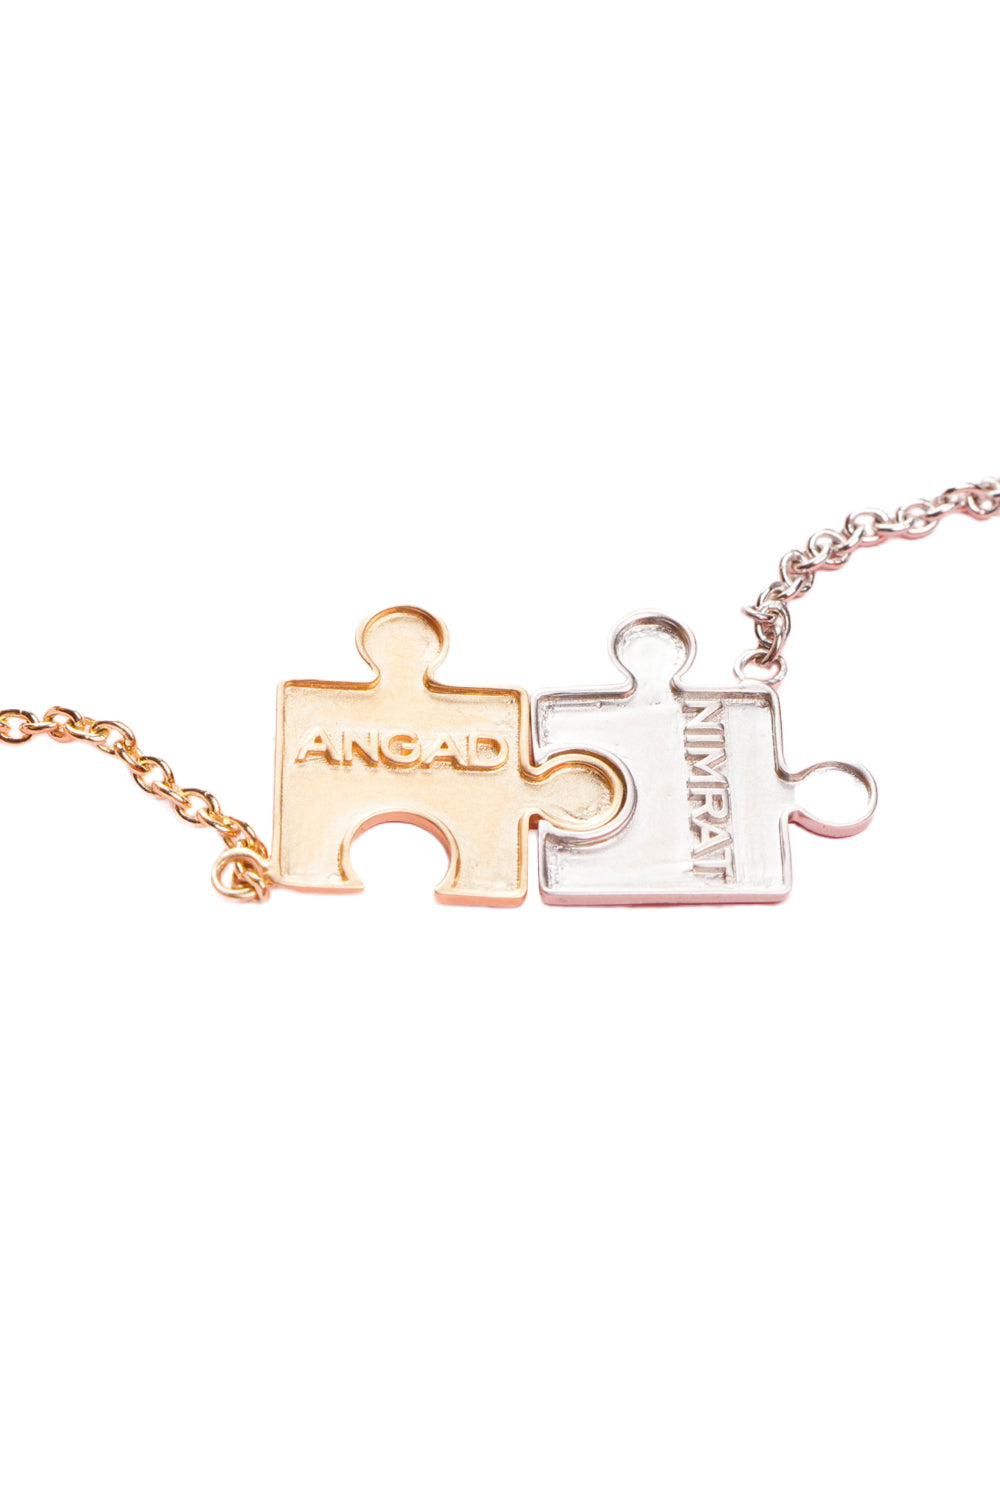 Personalised Puzzle Enamel 14KT Gold Chain Necklace